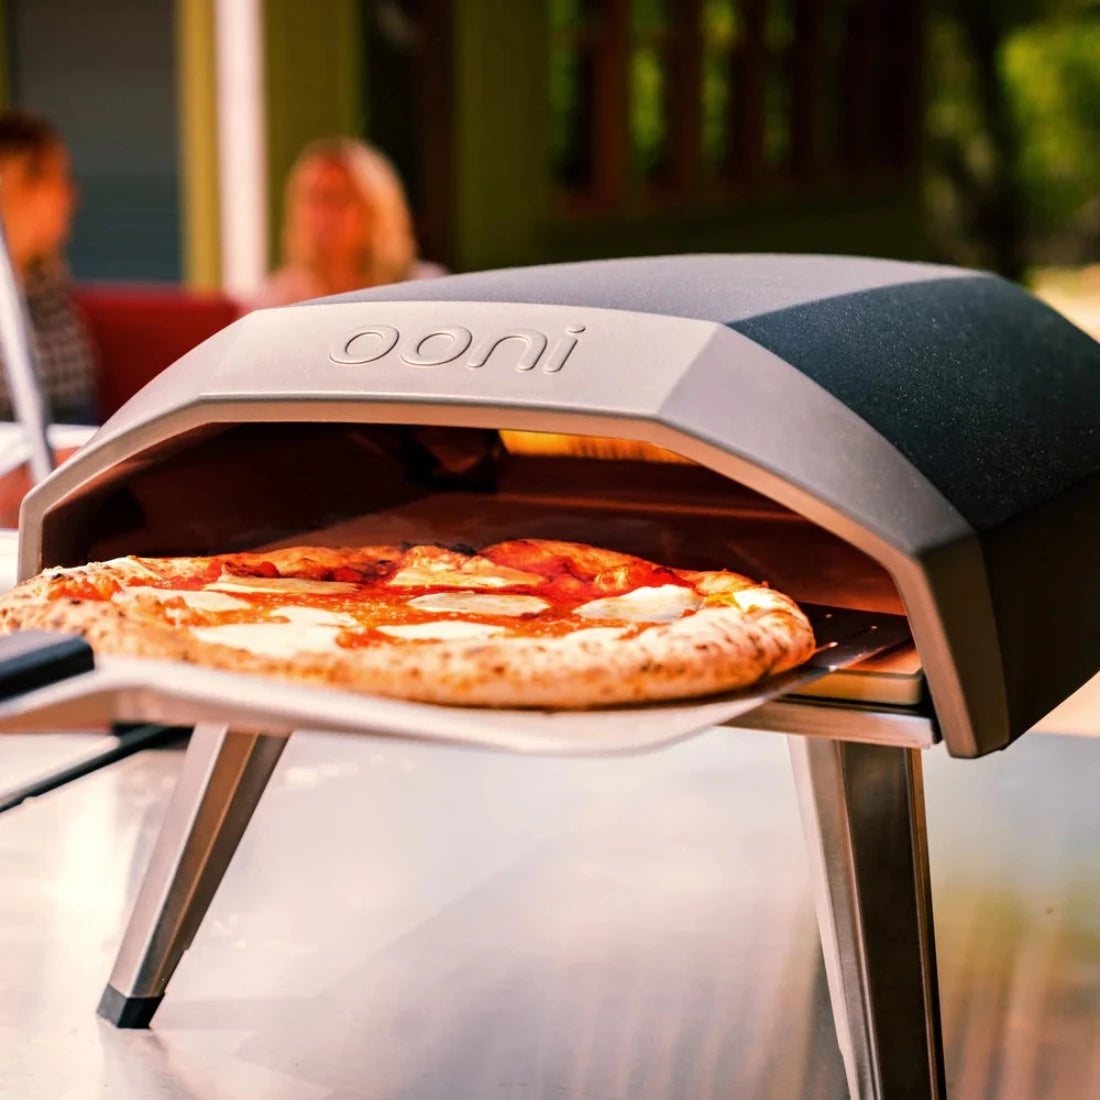 Koda 12 OOni Pizza oven to rental or rent - front on 